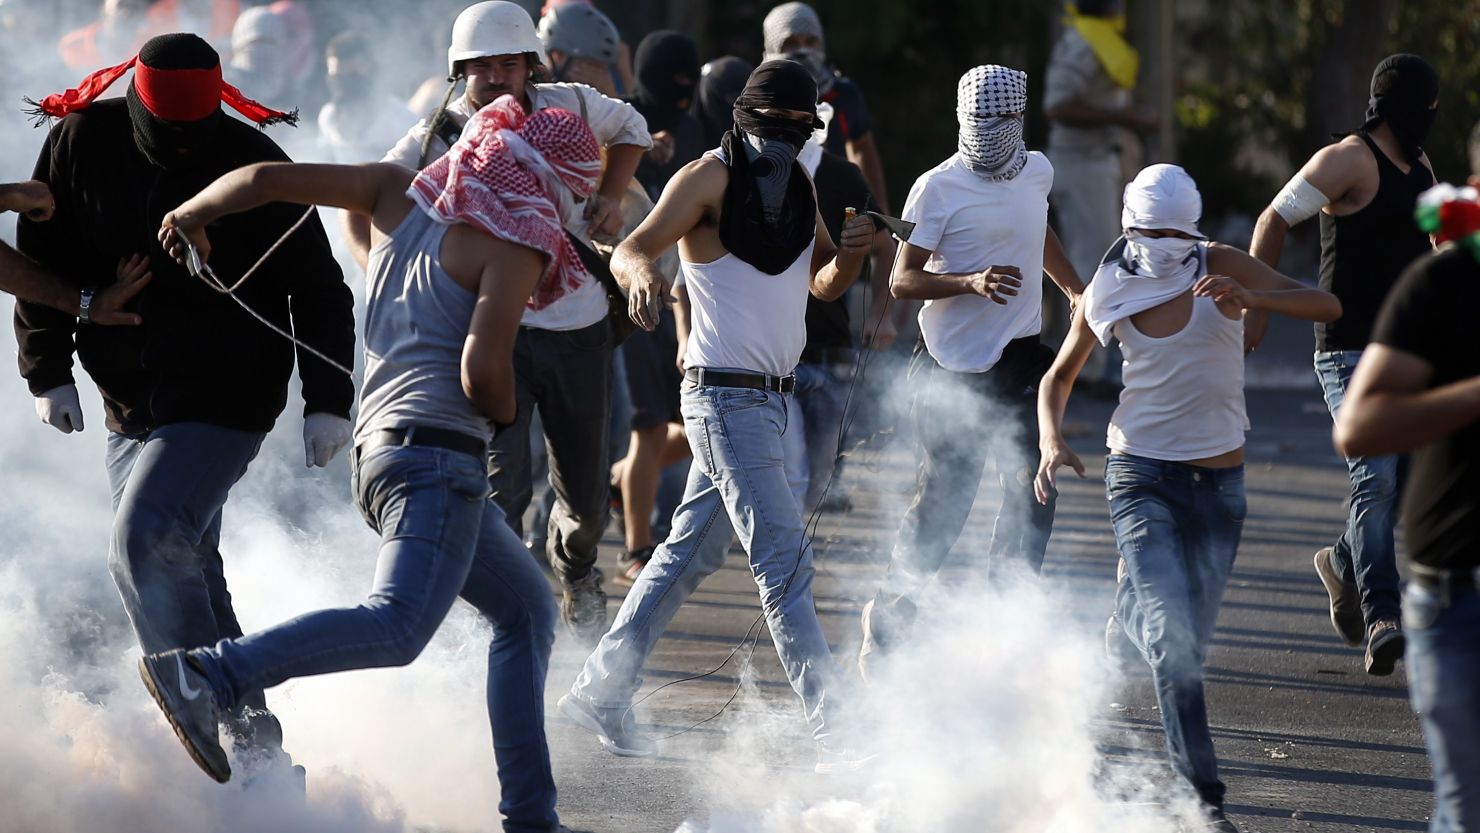 Palestinian protesters stand amid smoke after Israeli forces fired tear gas in East Jerusalem on July 4.